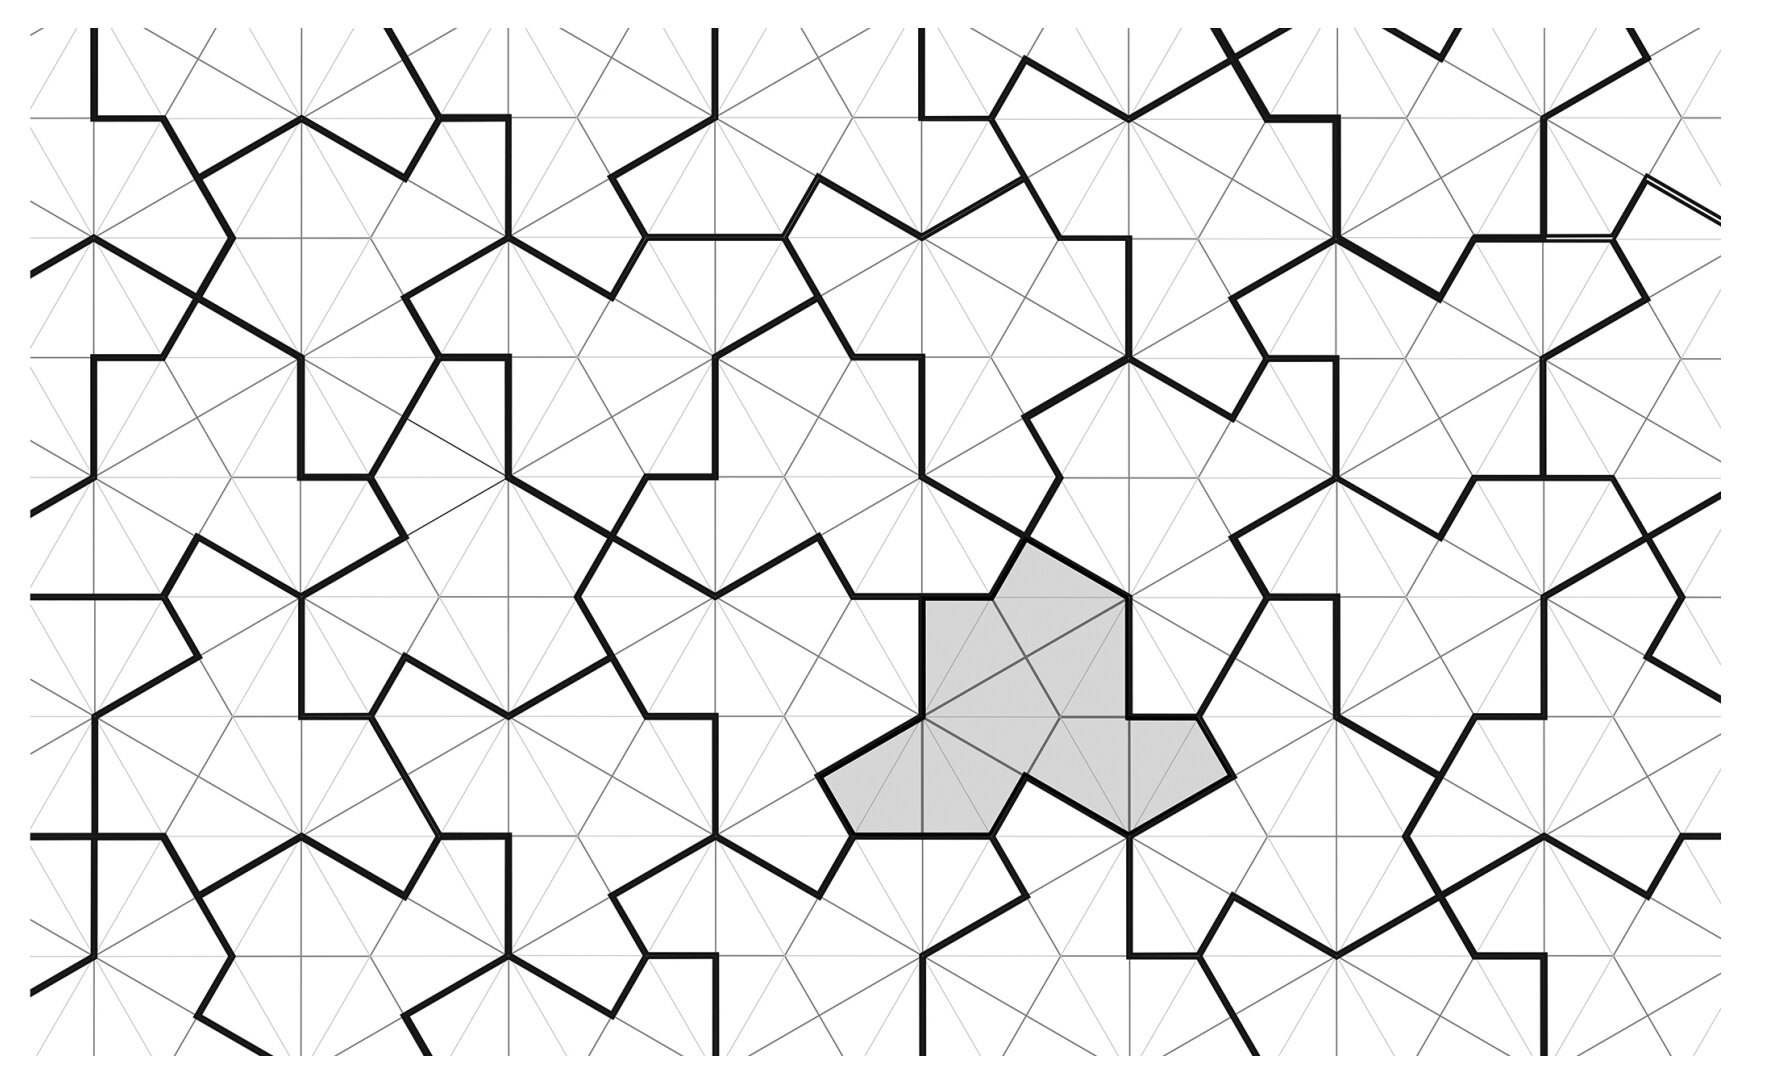 A geometric shape that does not repeat itself when tiled